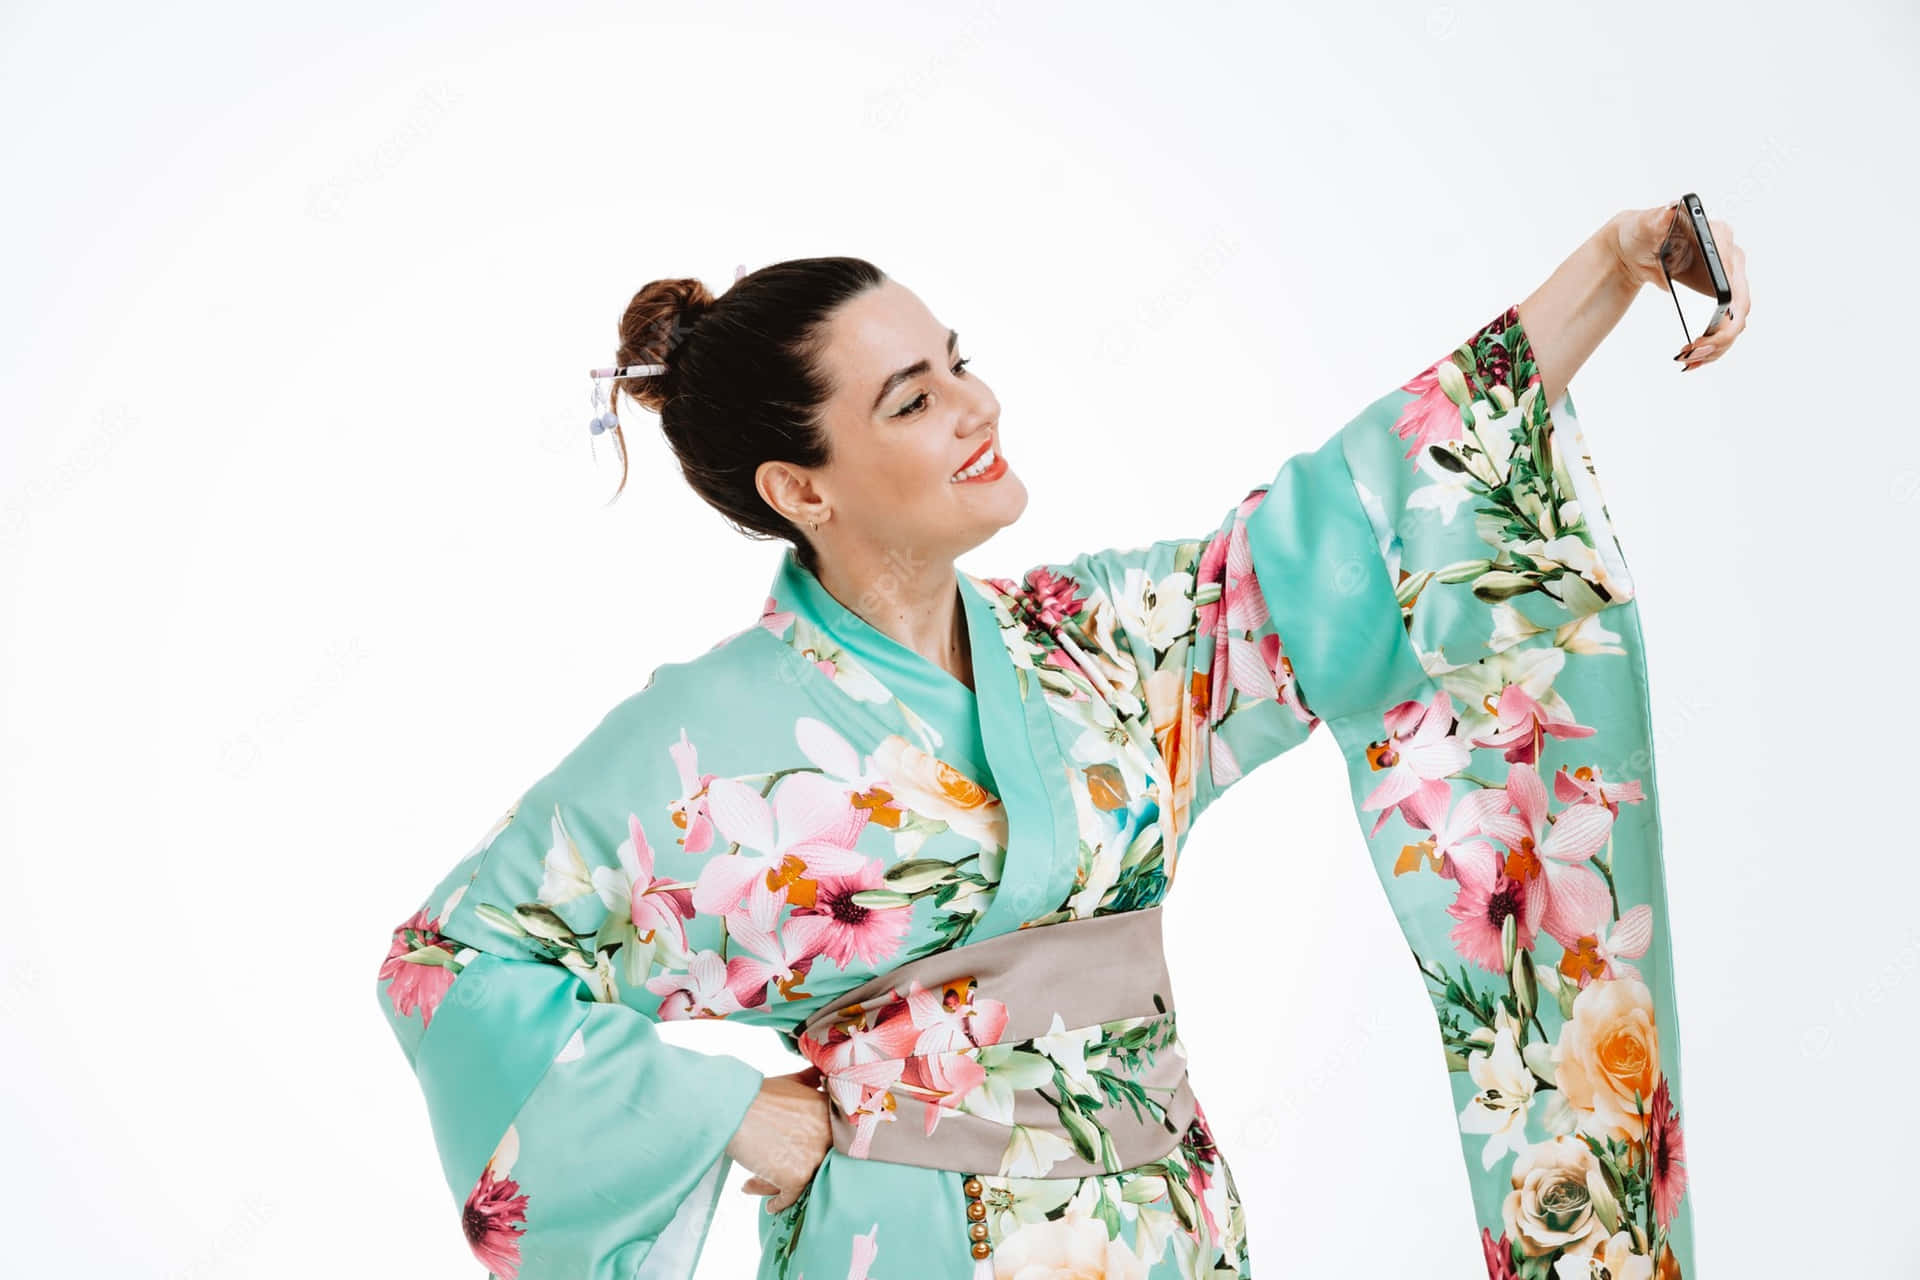 Get Ready for an Aesthetically Appealing Moment with a Lovely Kimono